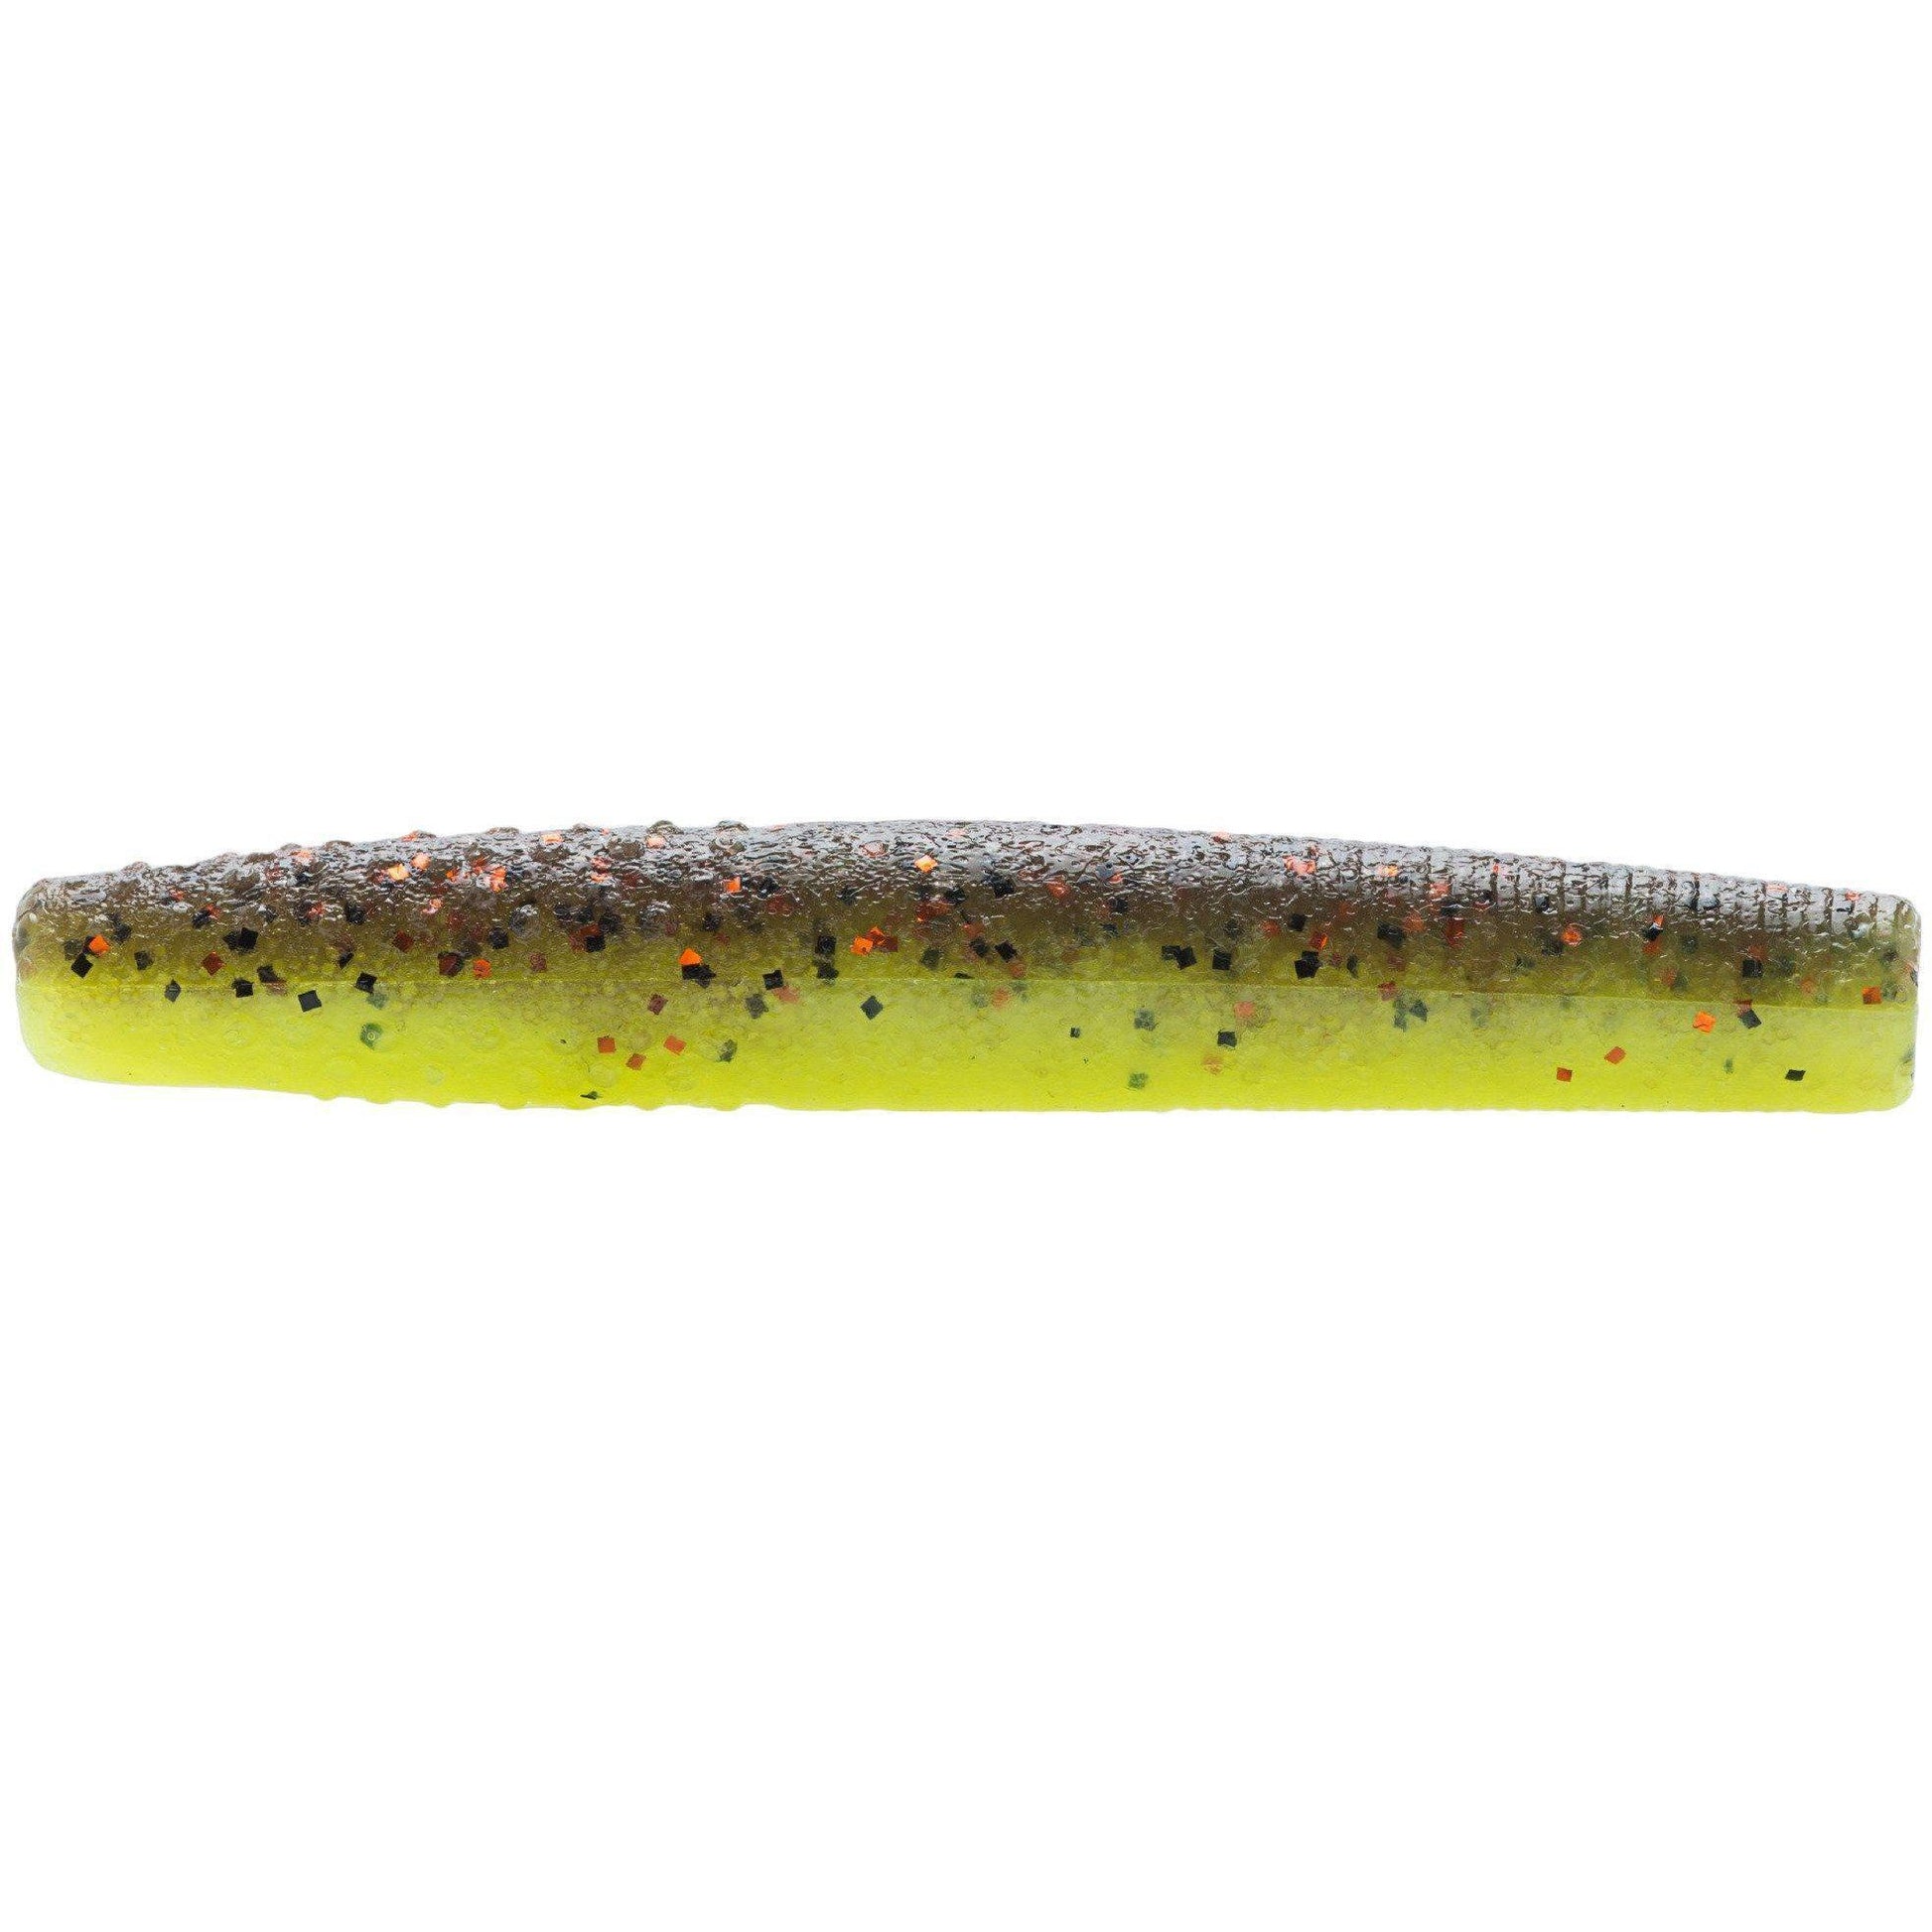 Z Man Finesse Trd 2.75 Coppertreuse 8 Pack – Hammonds Fishing